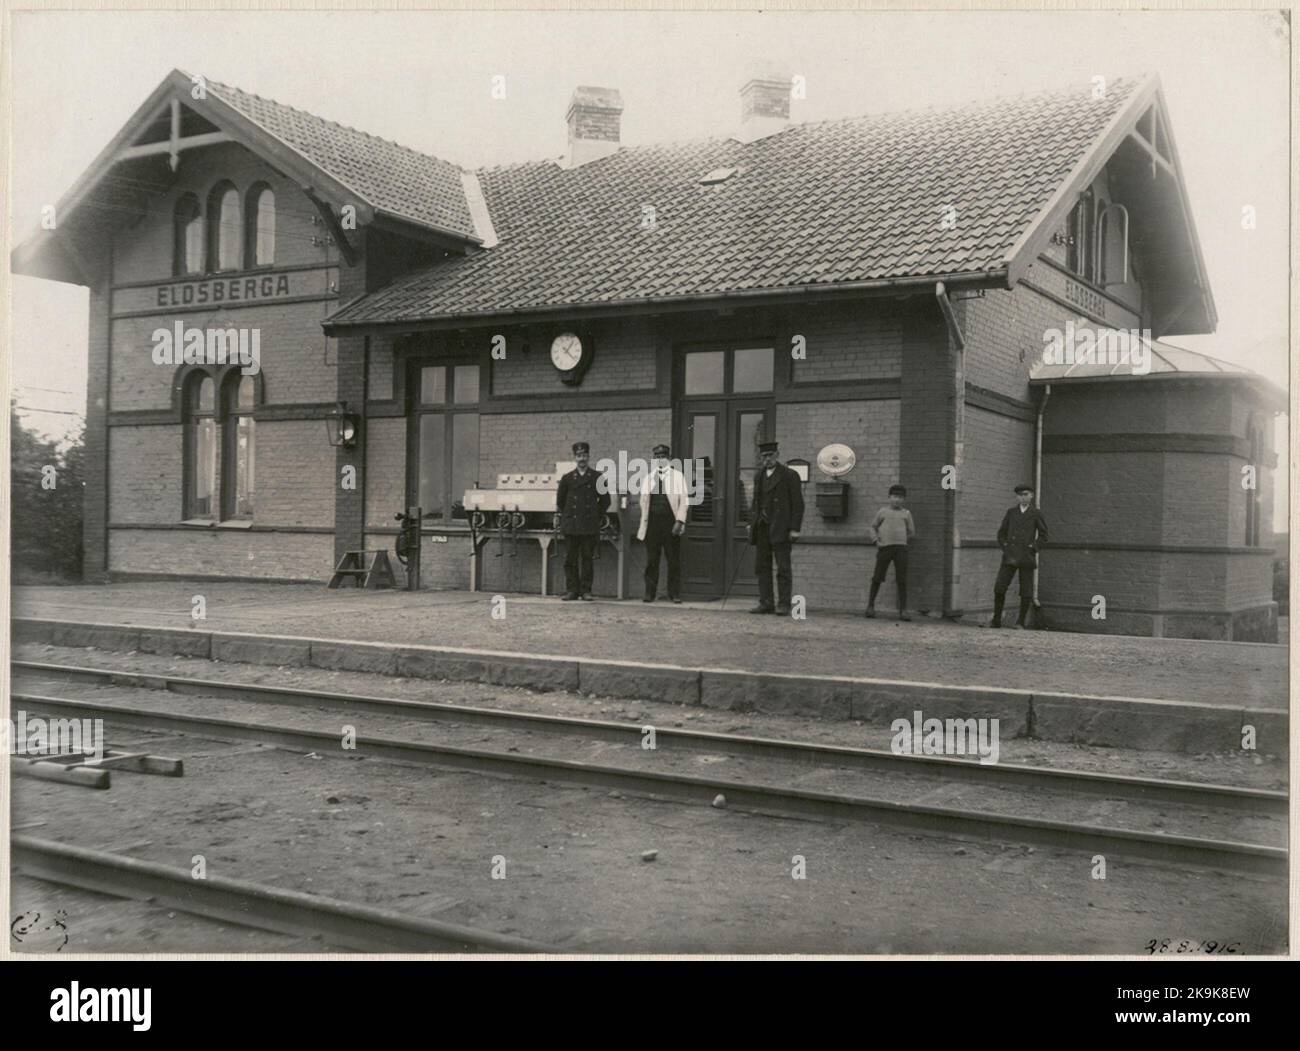 Eldsberga Railway Station was opened in 1885 by Skåne - Halland Railways SHJ. To SJ State Railways in 1896, and got electric power in 1935. Became a stop in 1964 and closed down May 31, 1970. Stock Photo